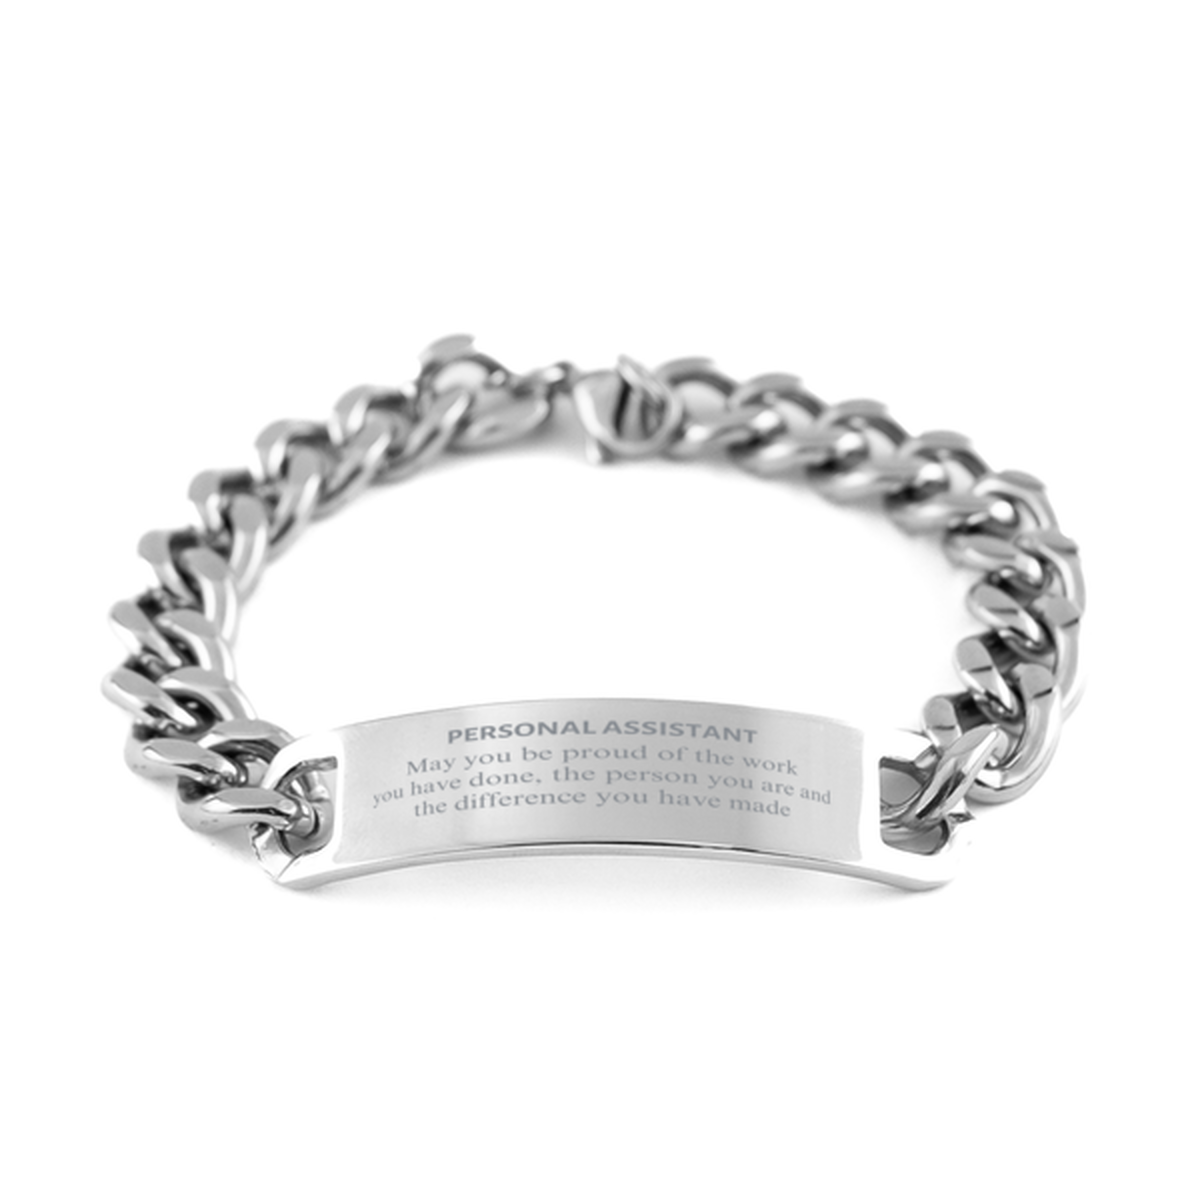 Personal Assistant May you be proud of the work you have done, Retirement Personal Assistant Cuban Chain Stainless Steel Bracelet for Colleague Appreciation Gifts Amazing for Personal Assistant